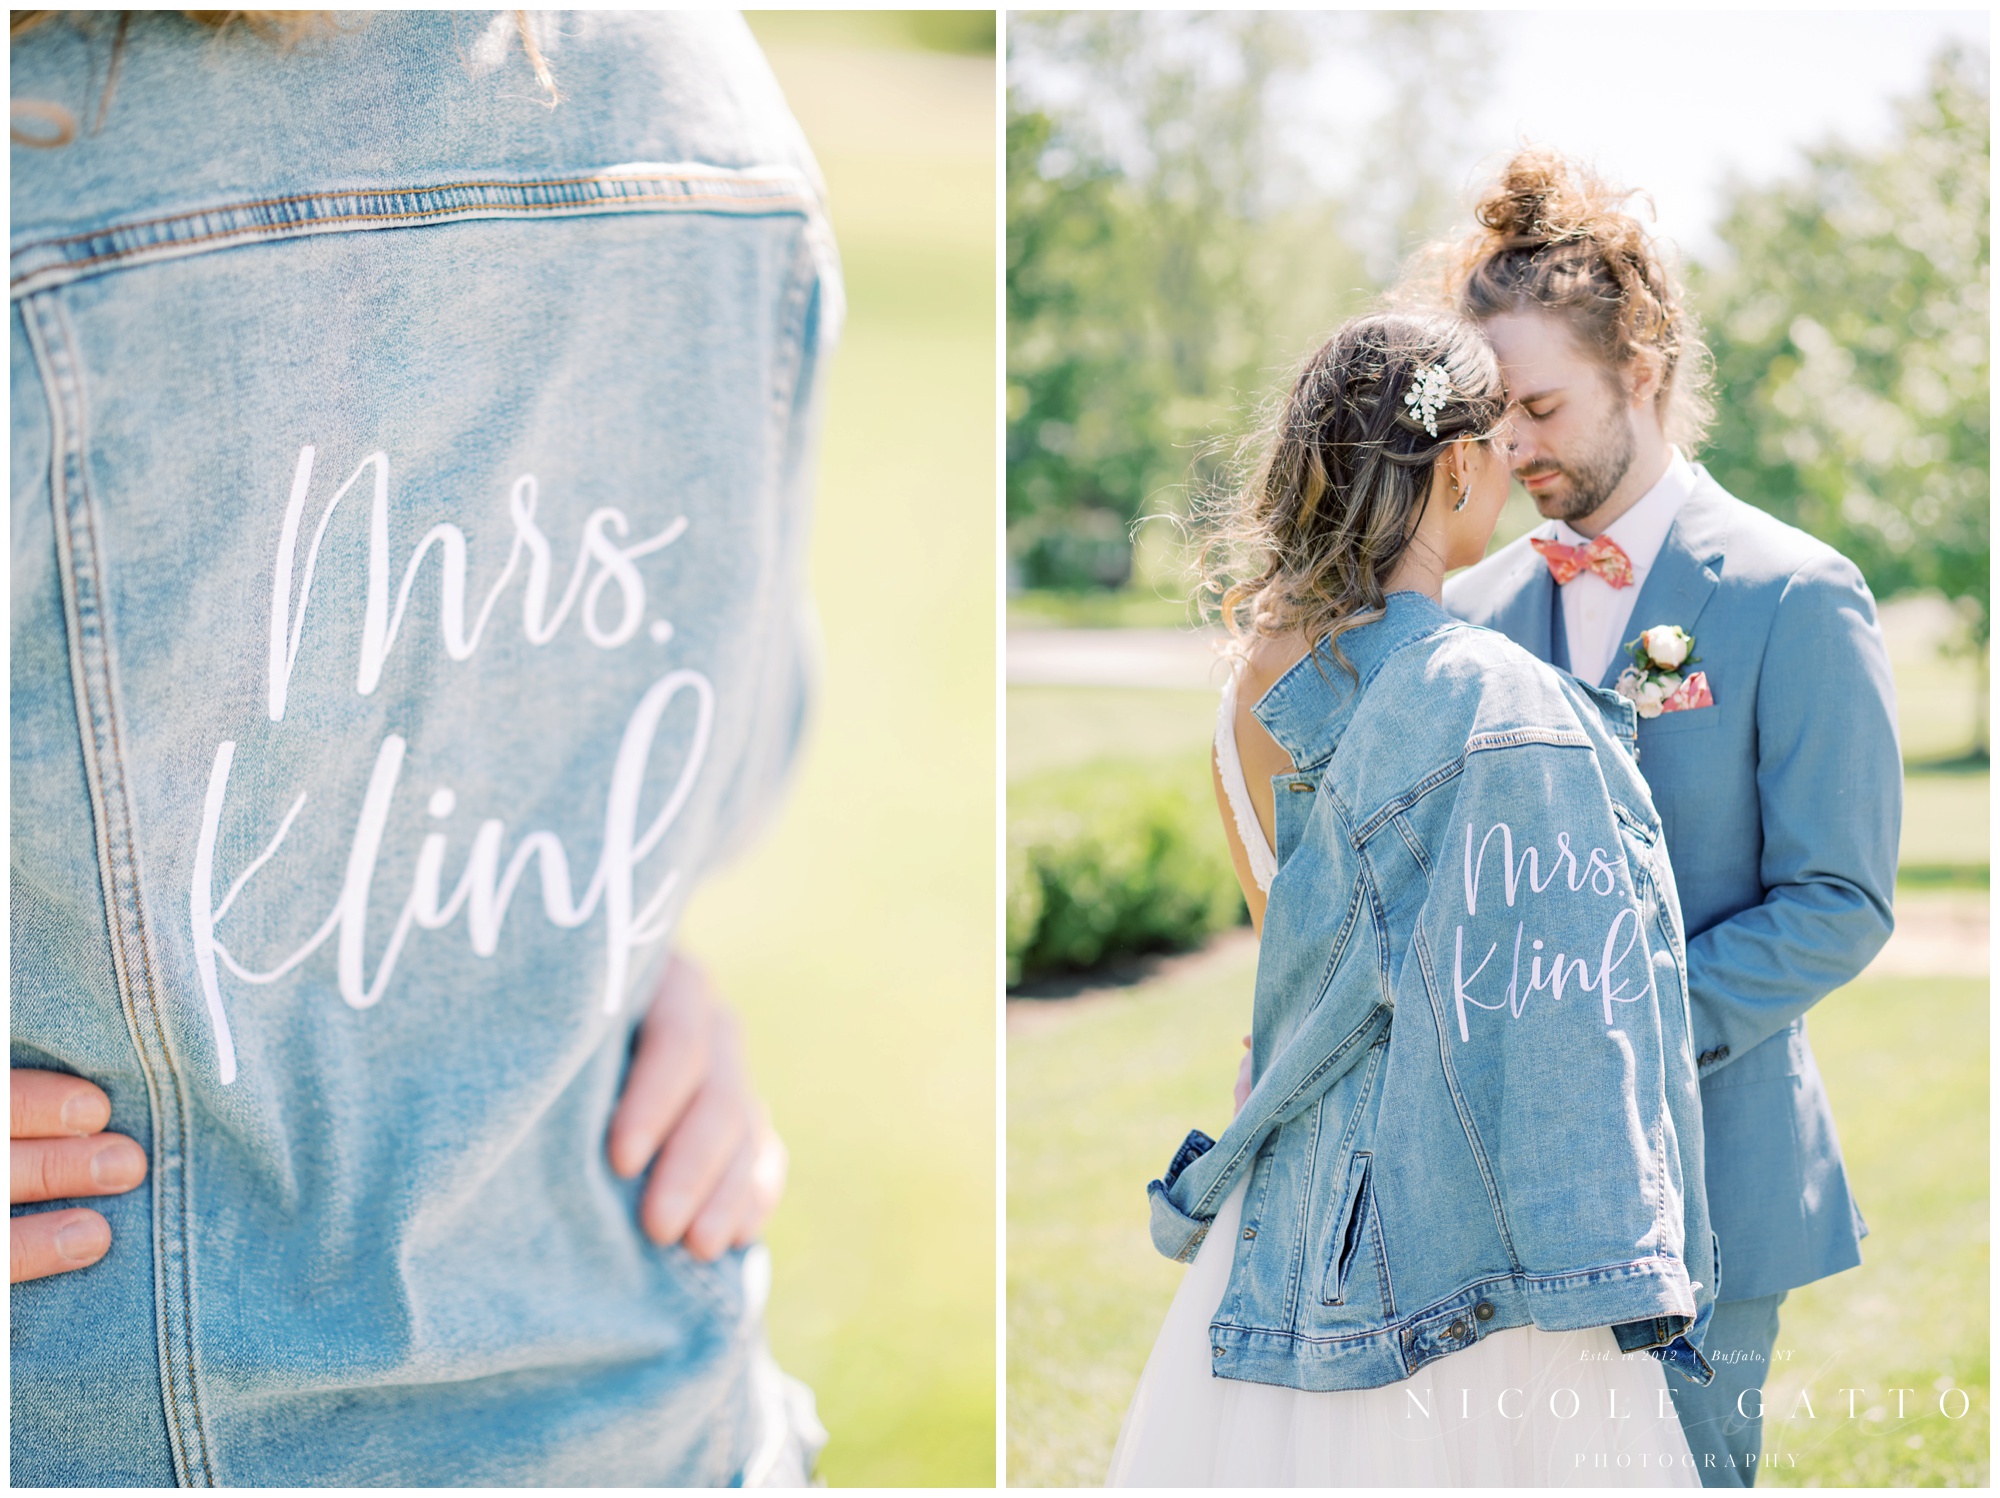 Bride wearing a jean jacket with her new last name in callighrapy on the back